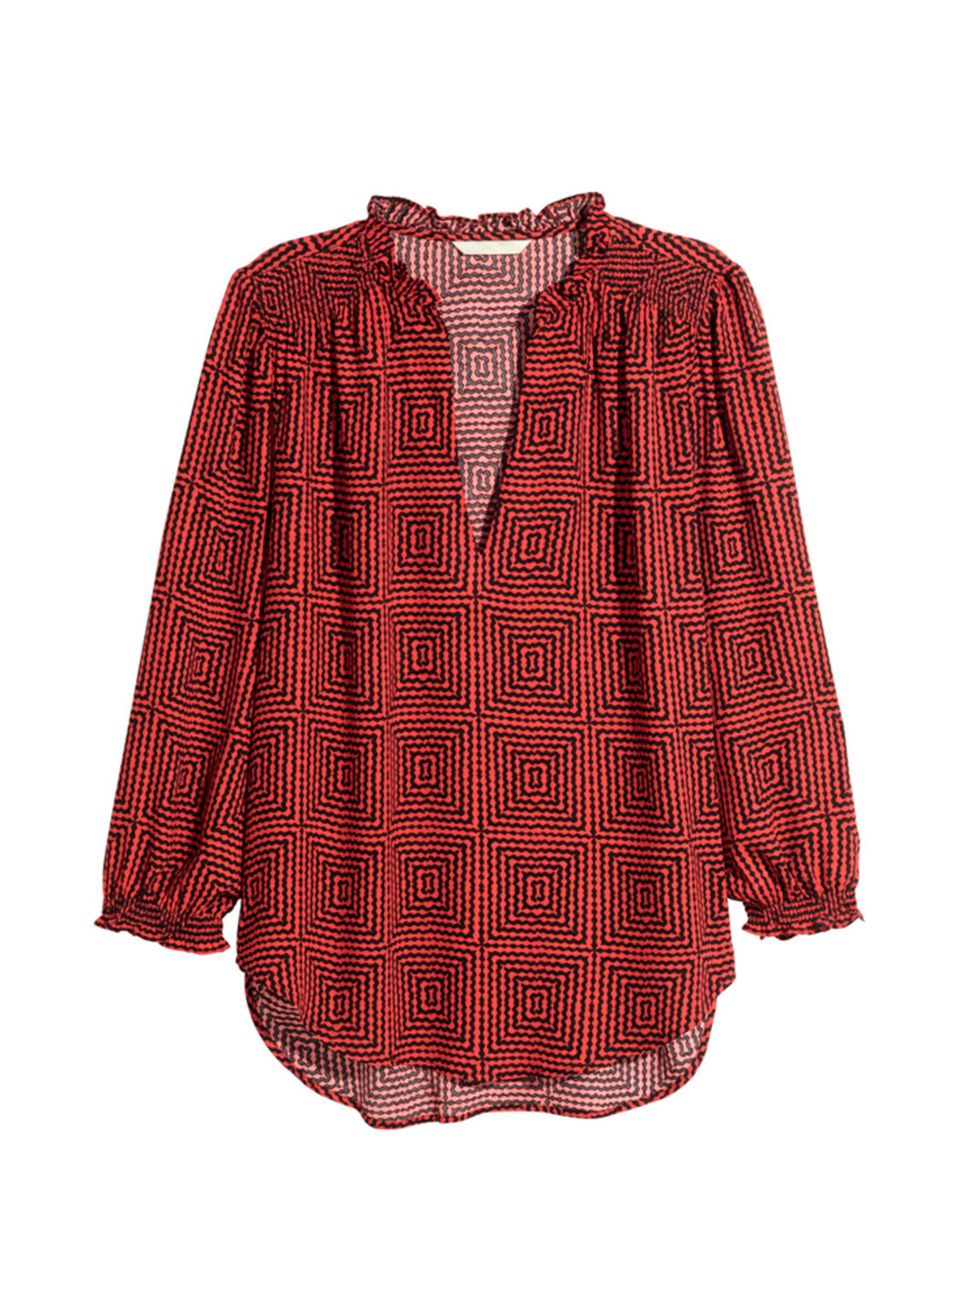 <p><a href="http://www.hm.com/gb/product/12213?article=12213-A" target="_blank">H&M</a> Blouse, £14.99</p>